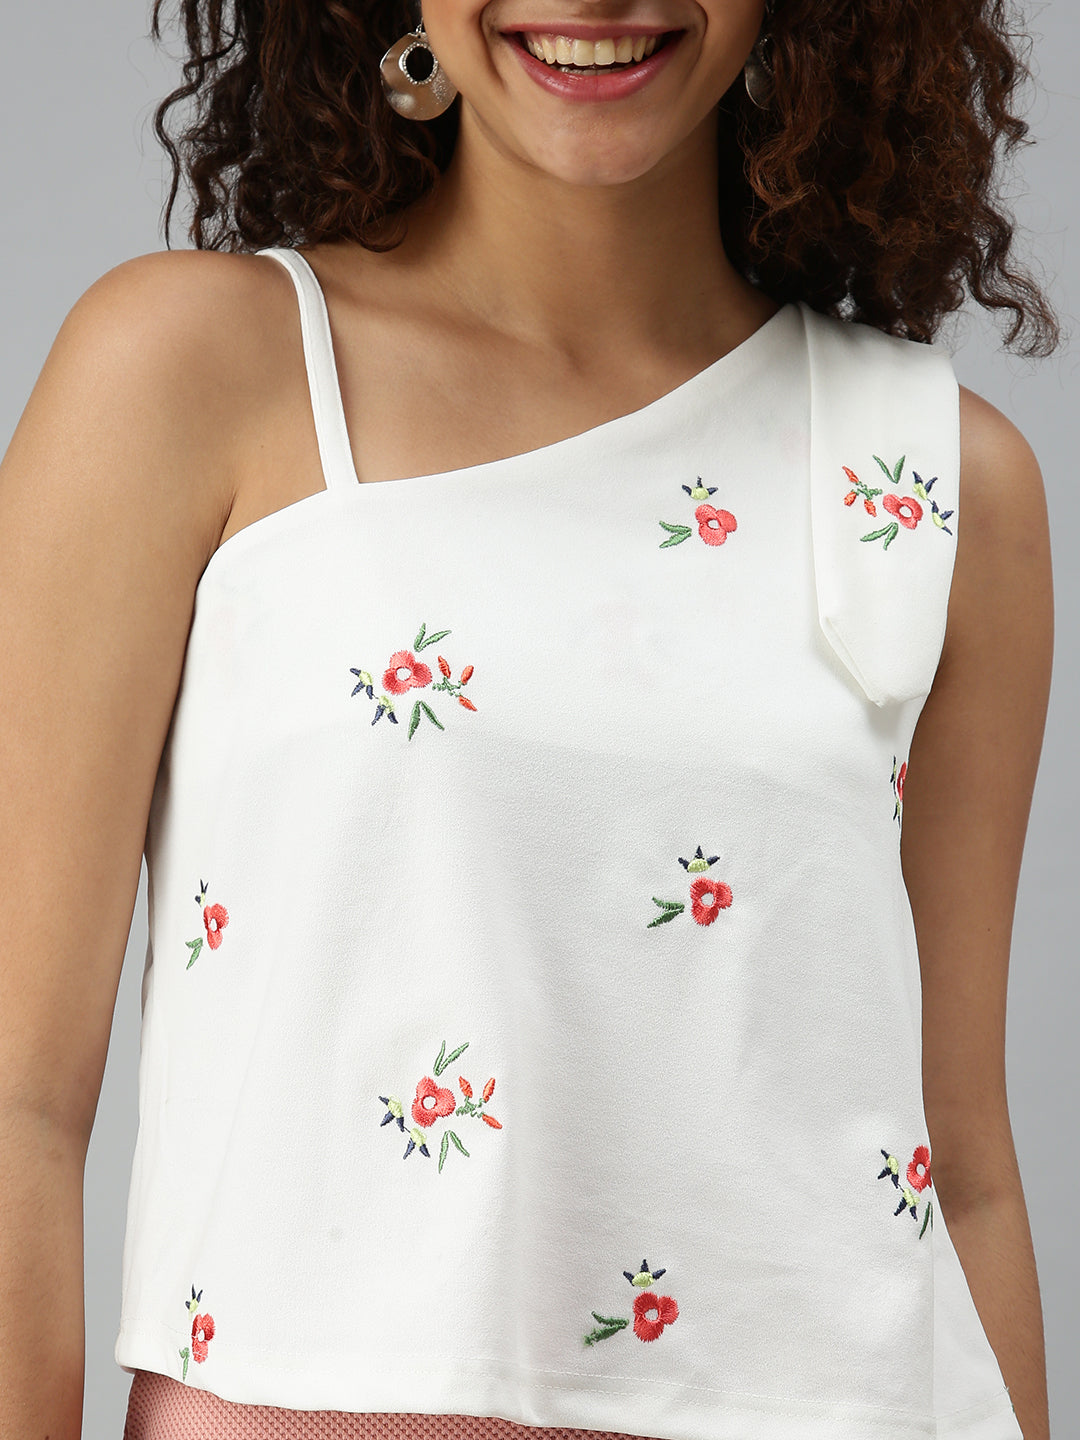 Women's Solid White Top